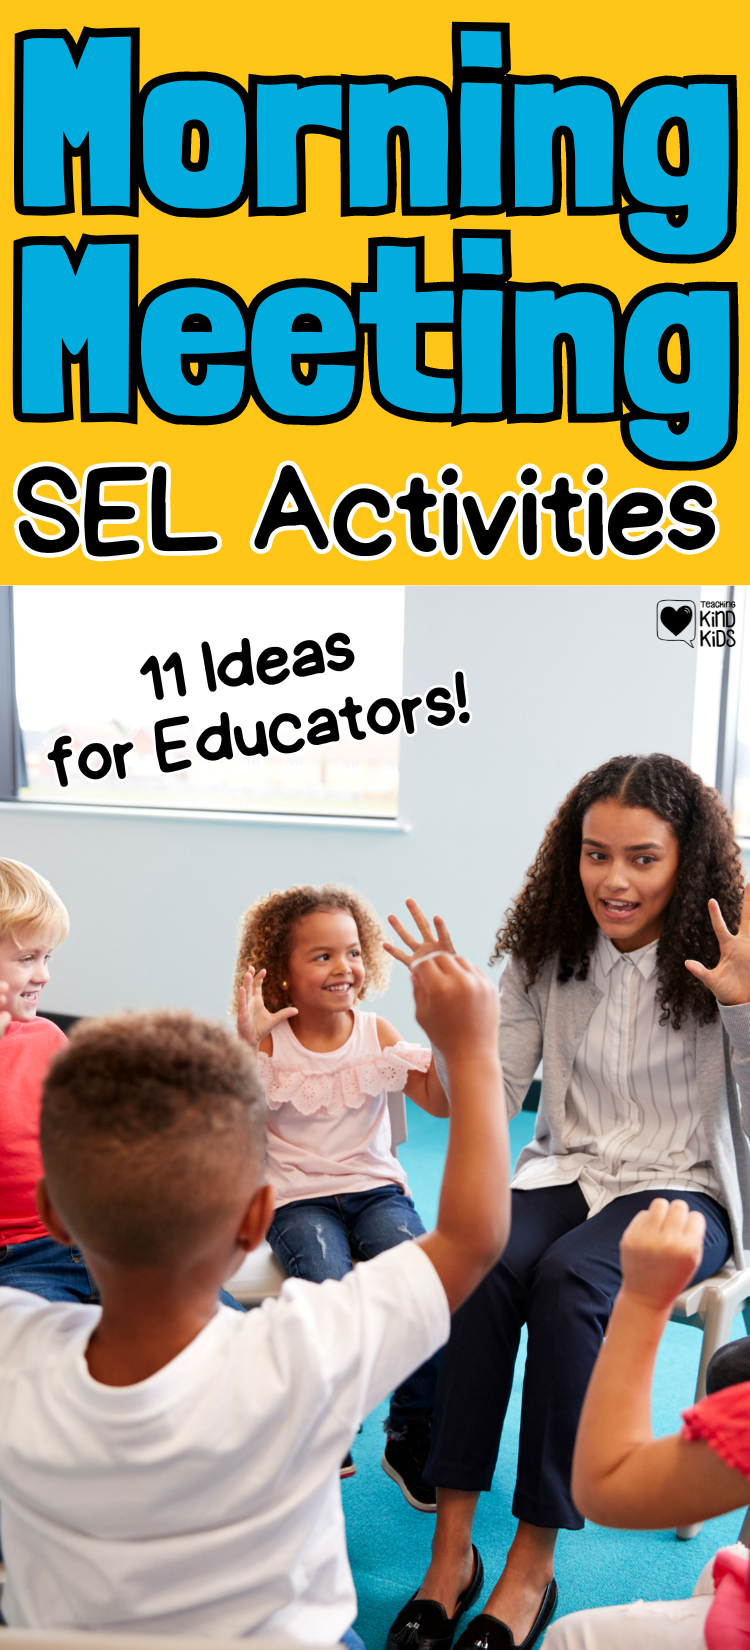 11 Morning Meeting SEL Activities for Educators to use to start the day with more kindness and connect with students.